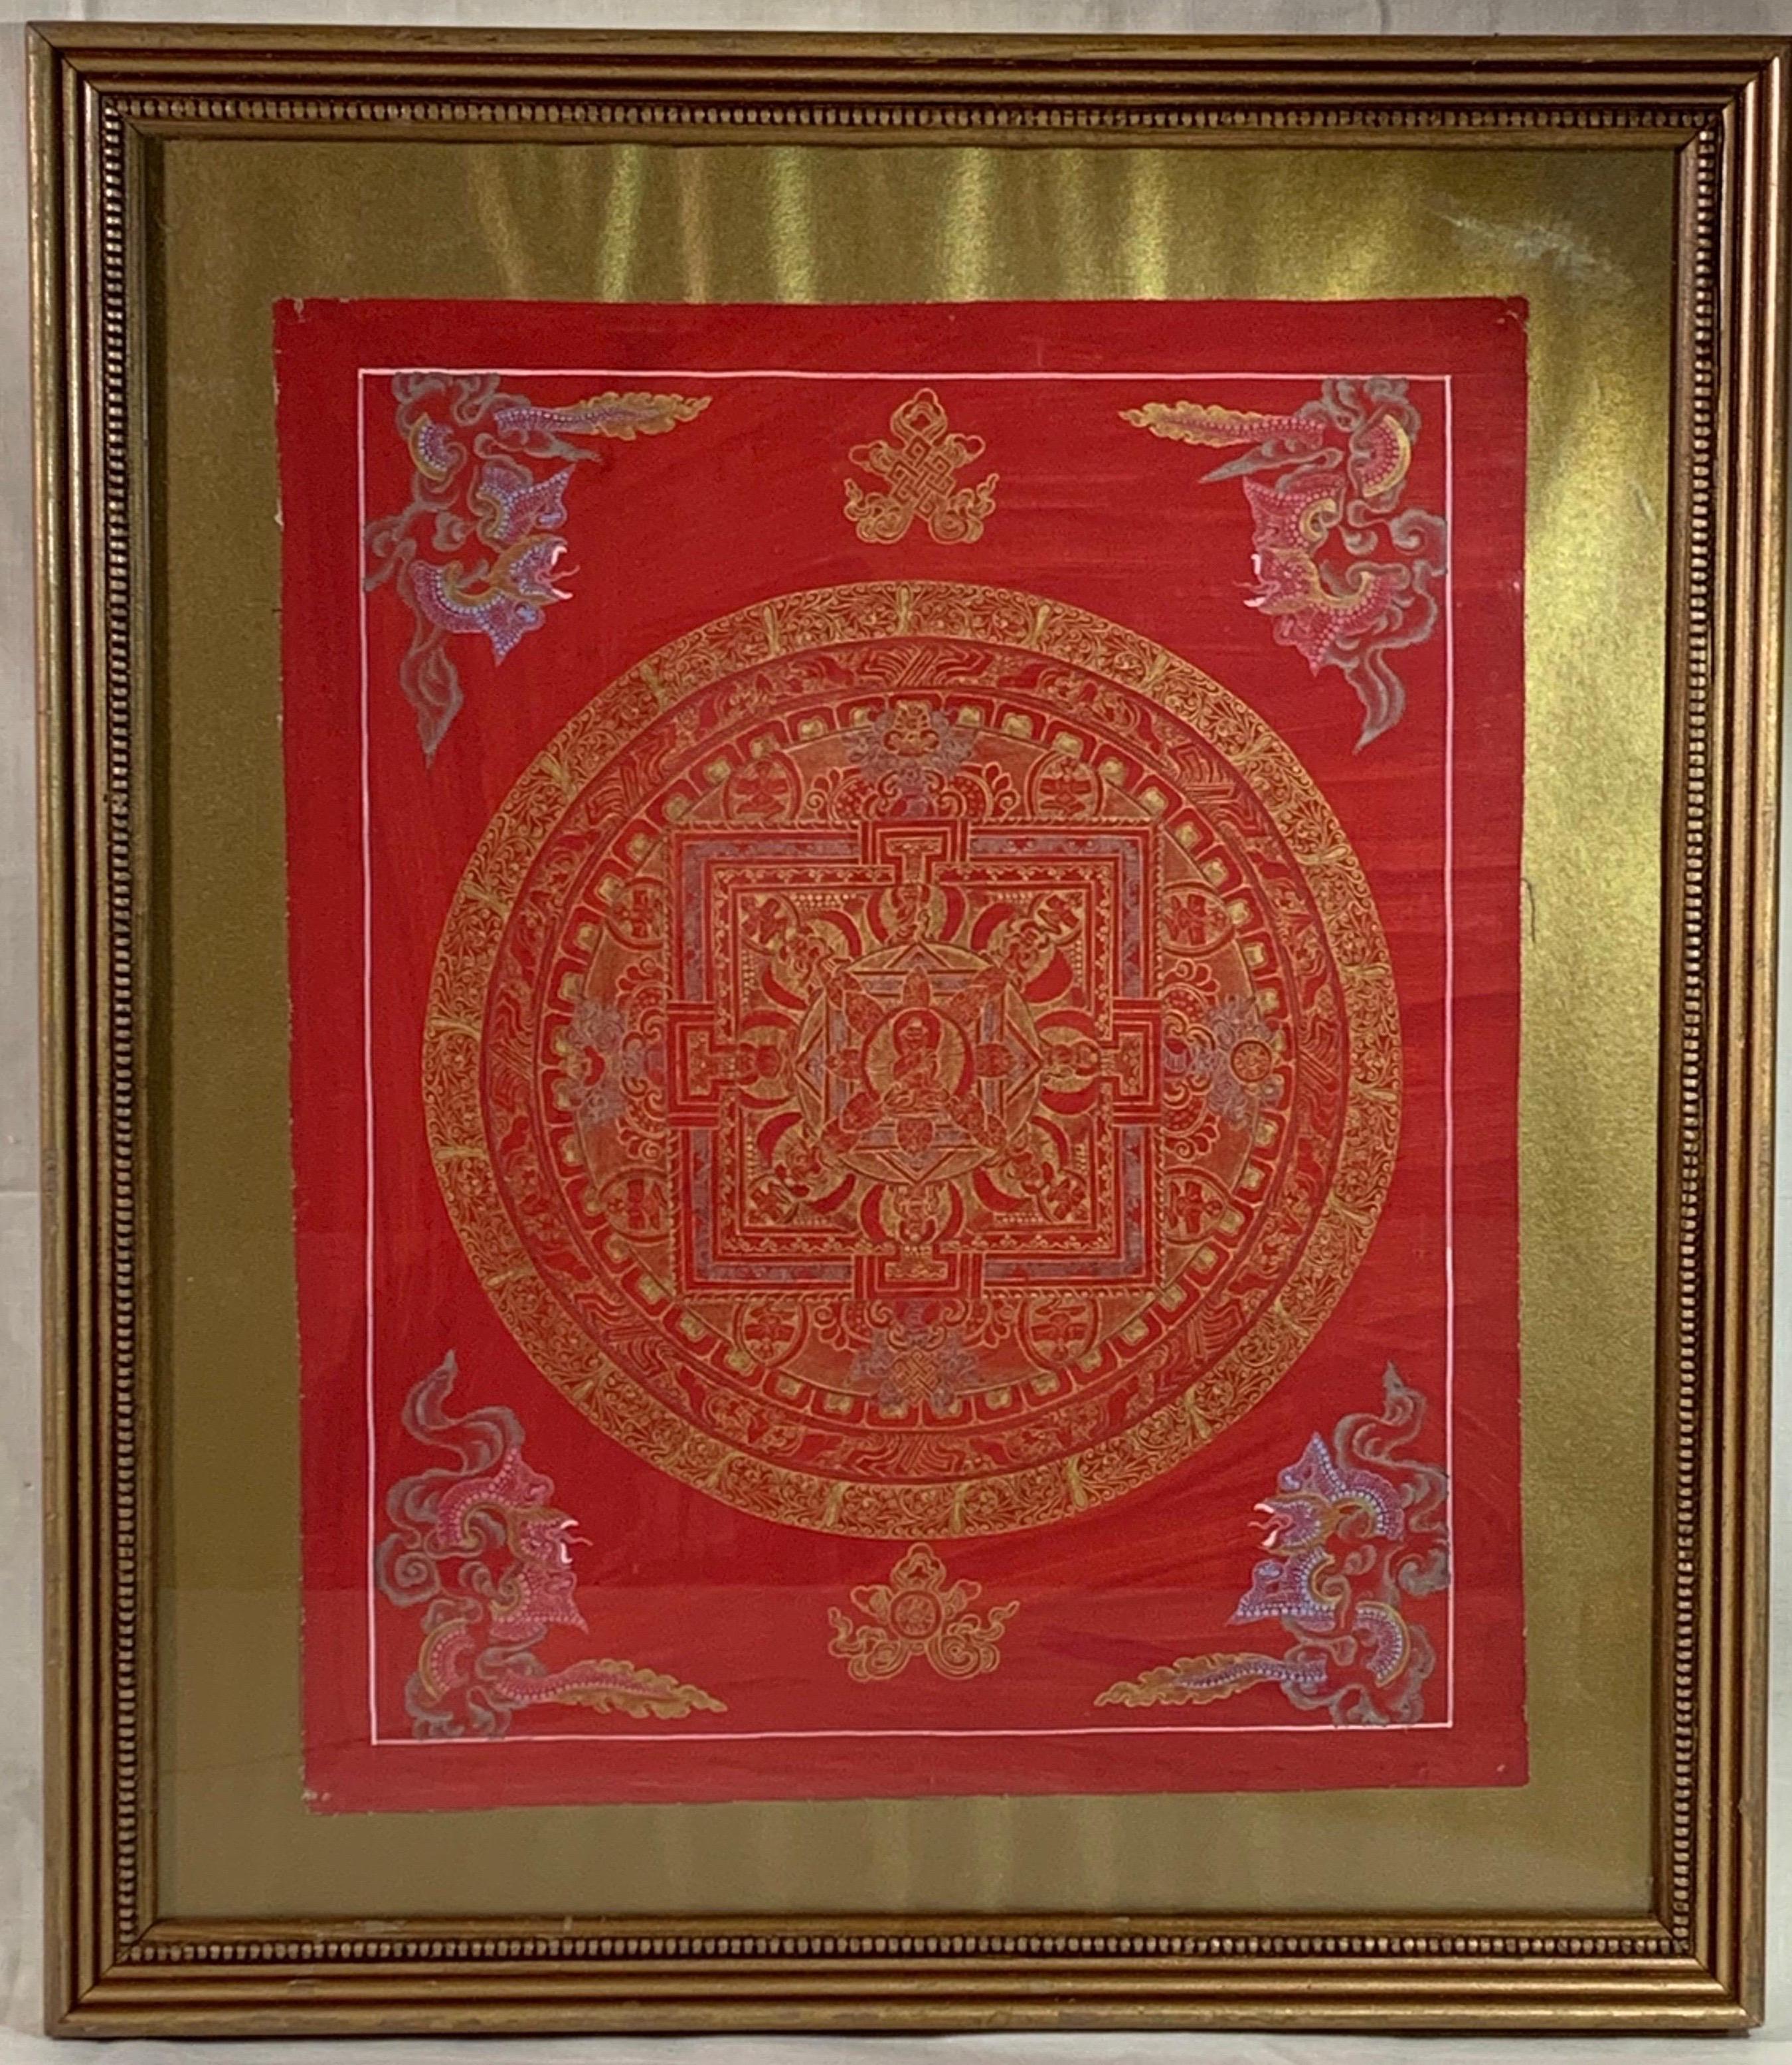 Framed Hand Painted Original Mandala Thangka with 24K Gold on Canvas - Mixed Media Art by Unknown